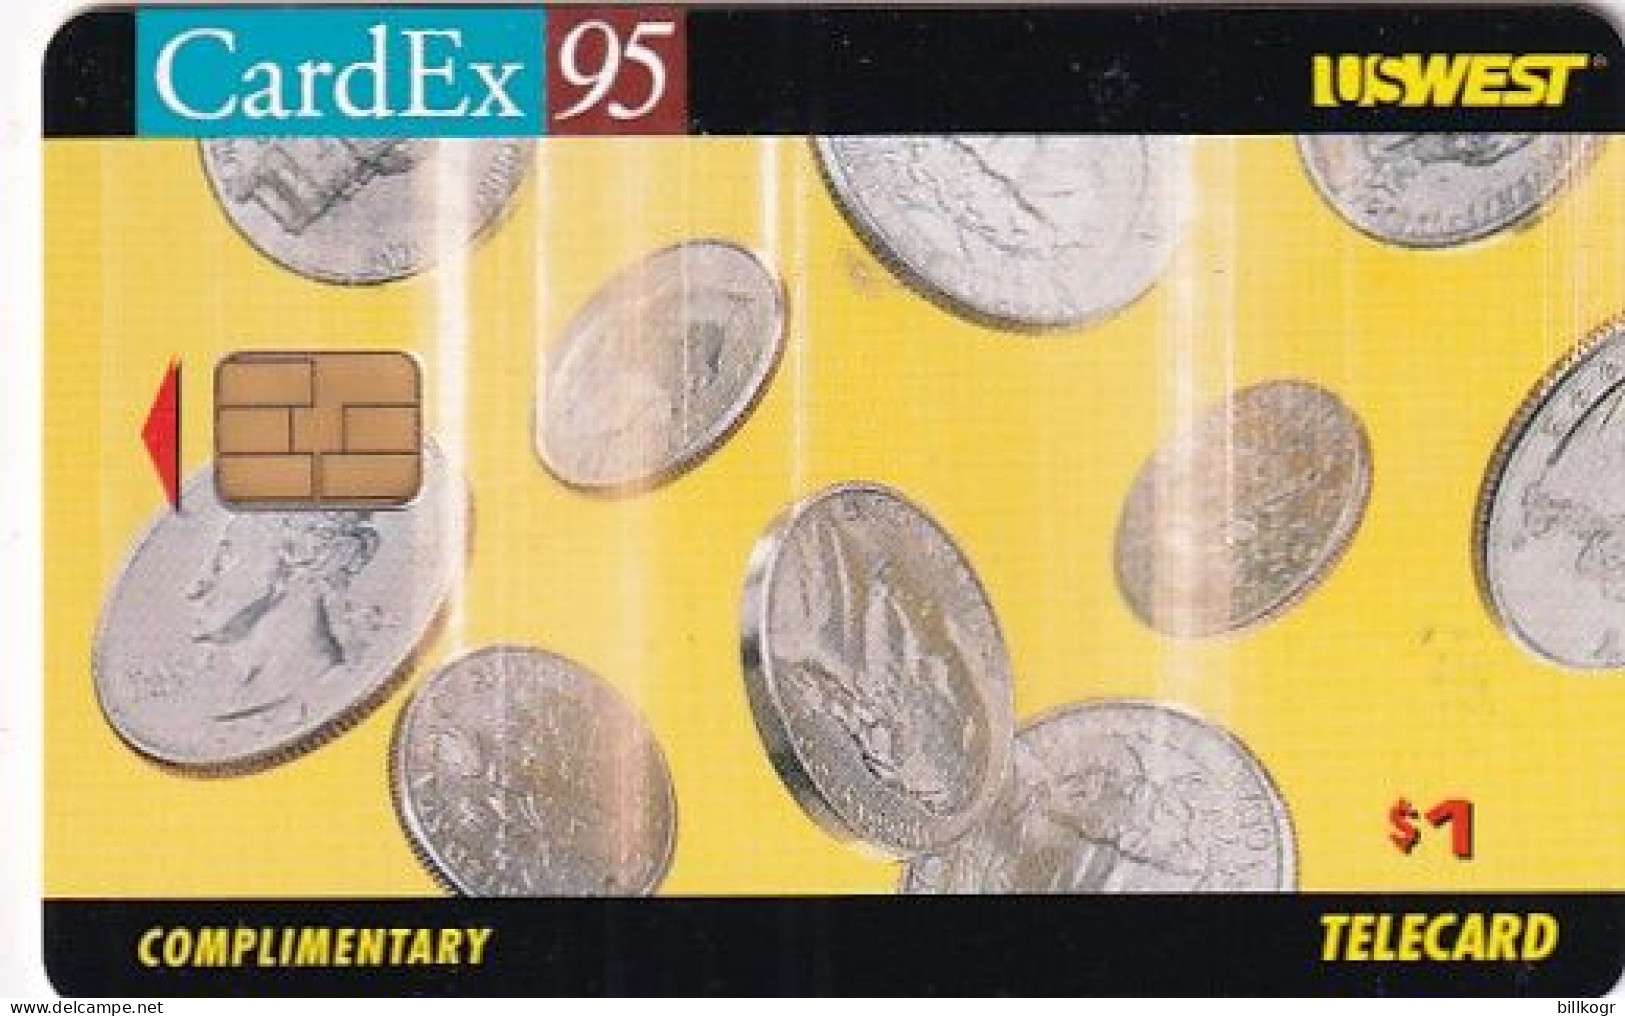 USA - CardEx 95 Maastricht, US WEST Complimentary Telecard, Tirage 1000, 09/95, Mint - [2] Chip Cards